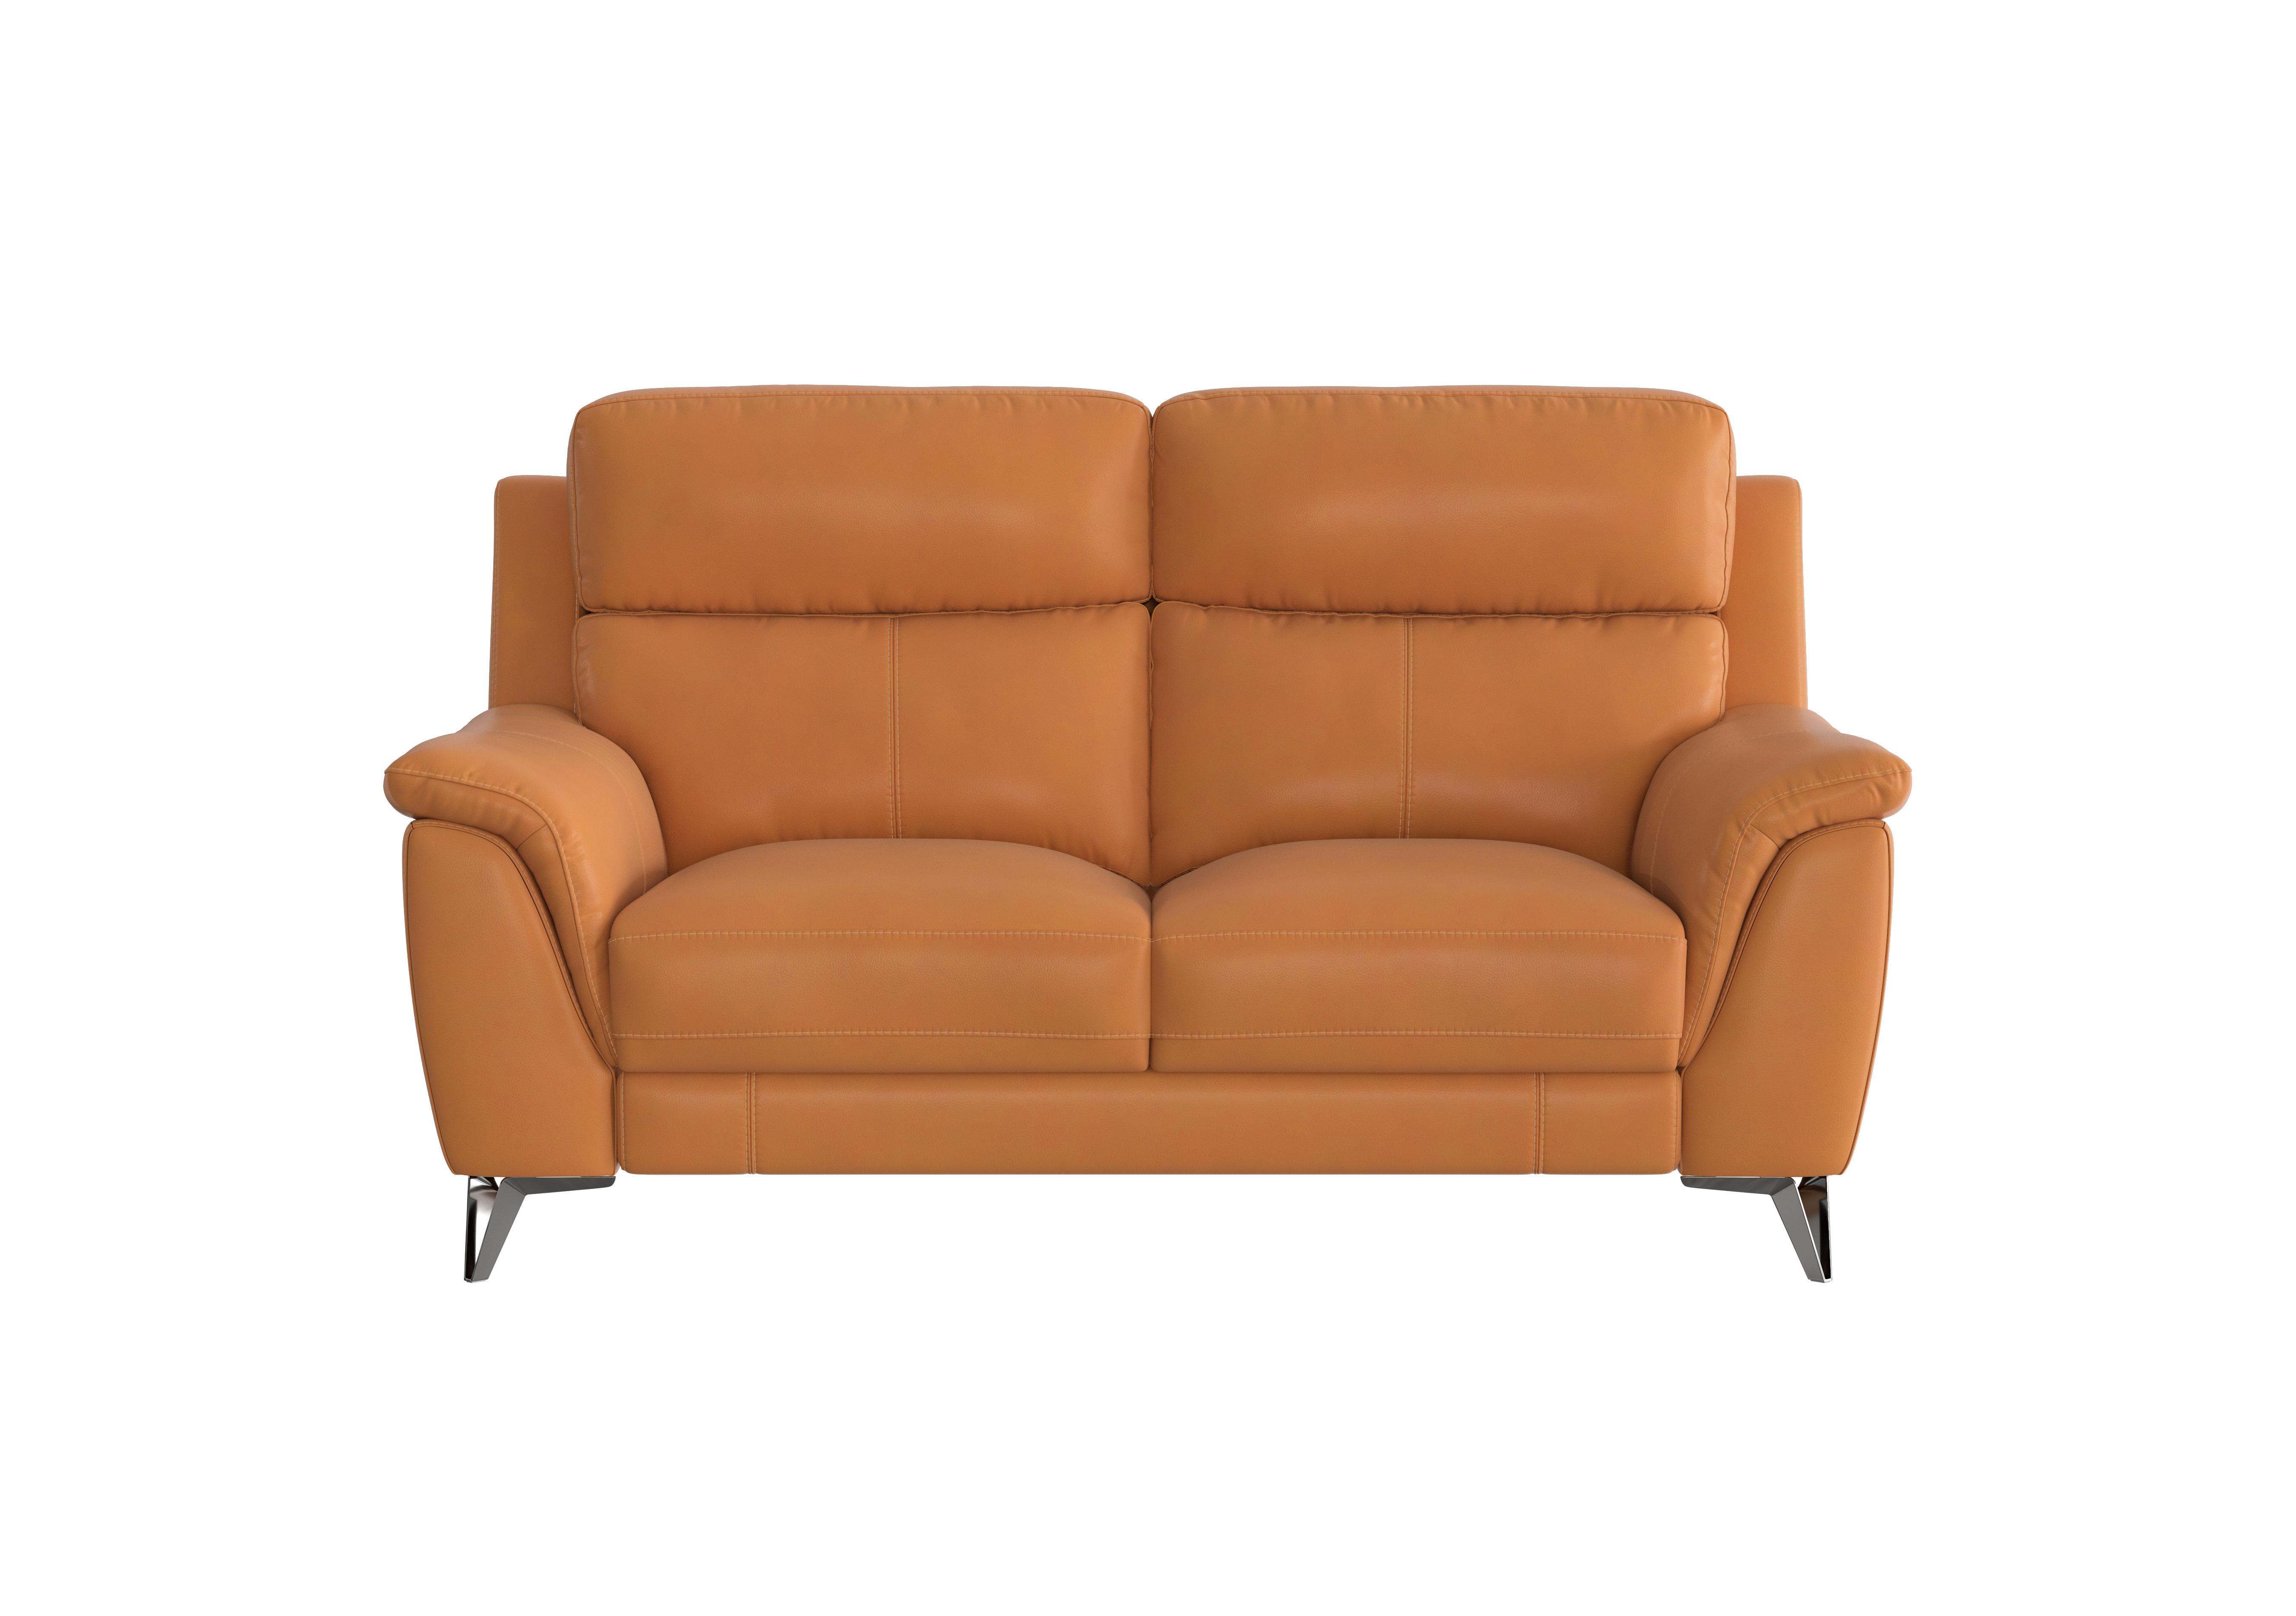 Contempo 2 Seater Leather Sofa in Bv-335e Honey Yellow on Furniture Village